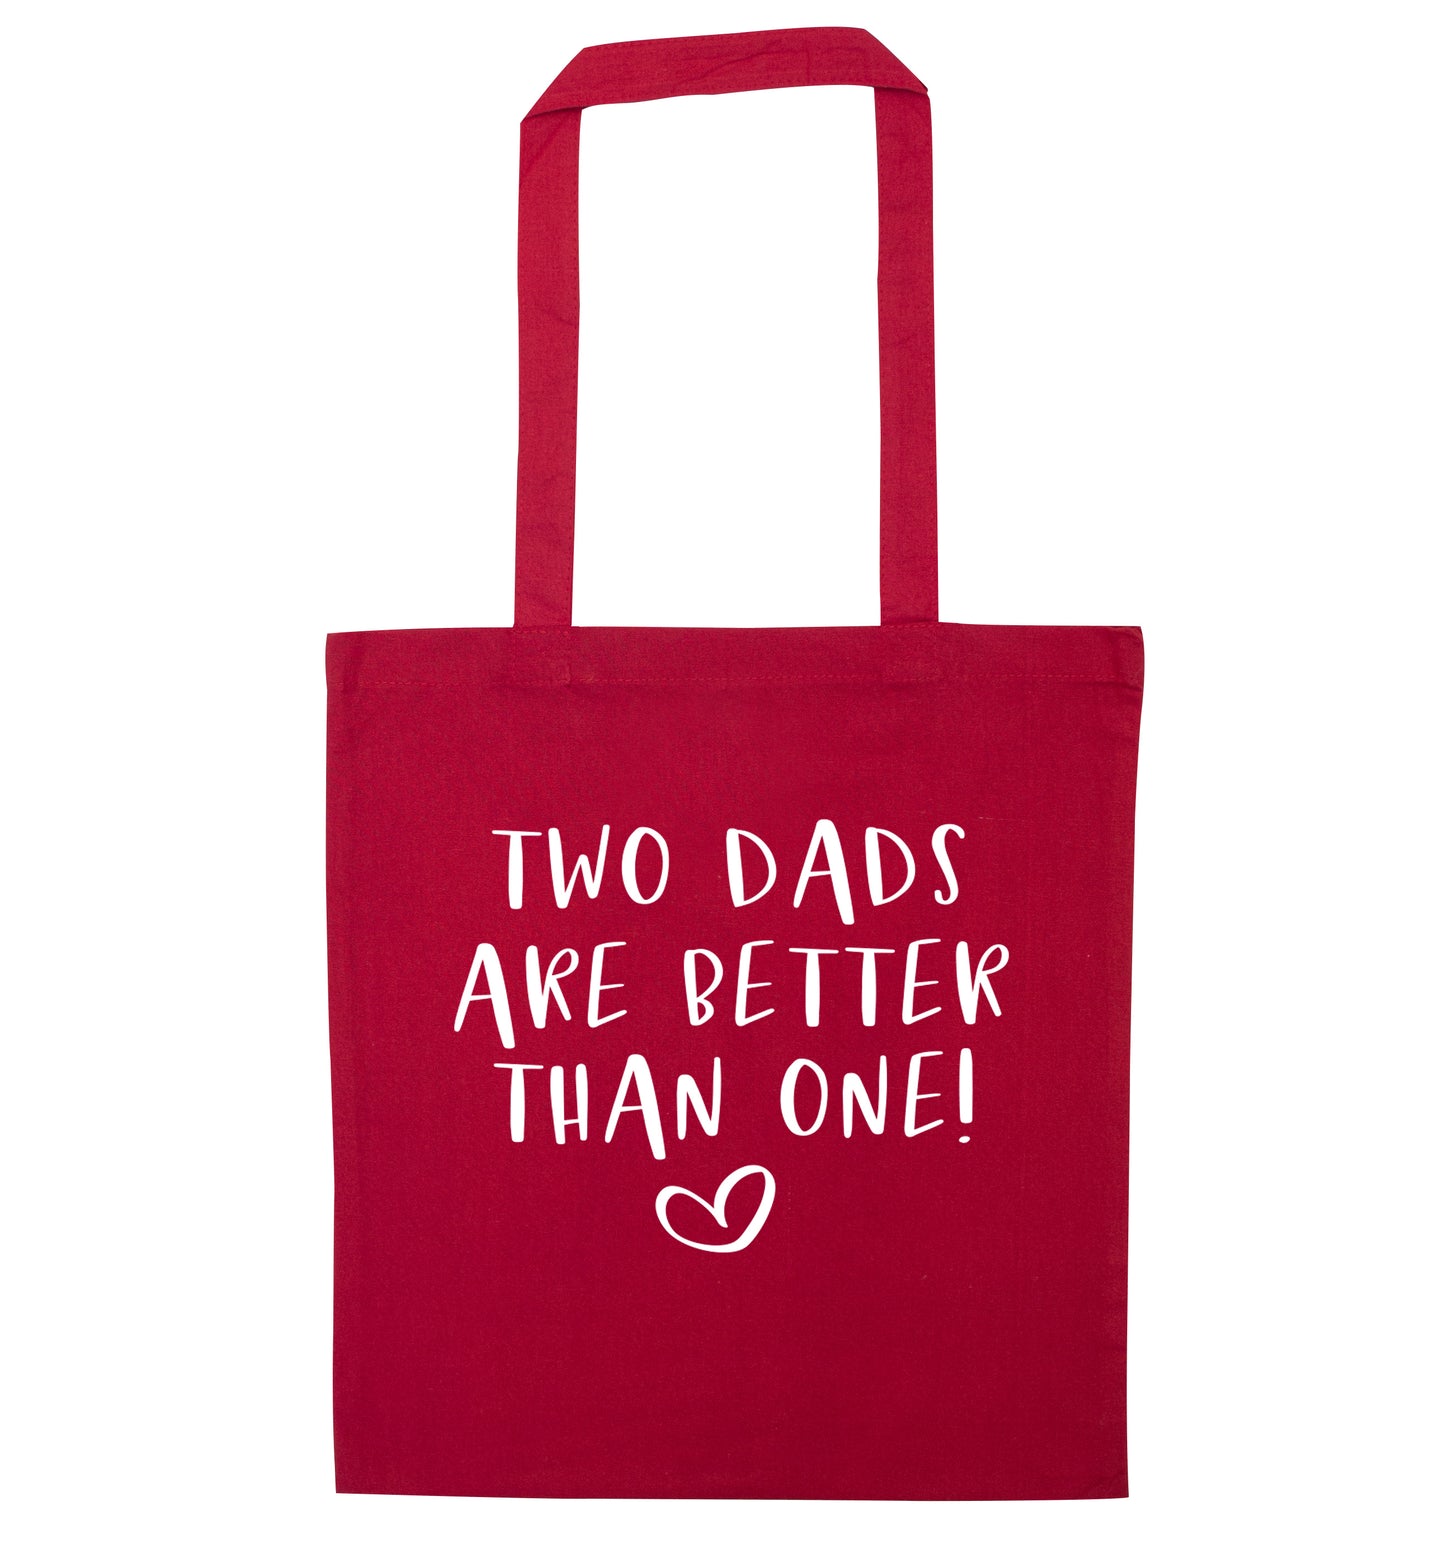 Two dads are better than one red tote bag